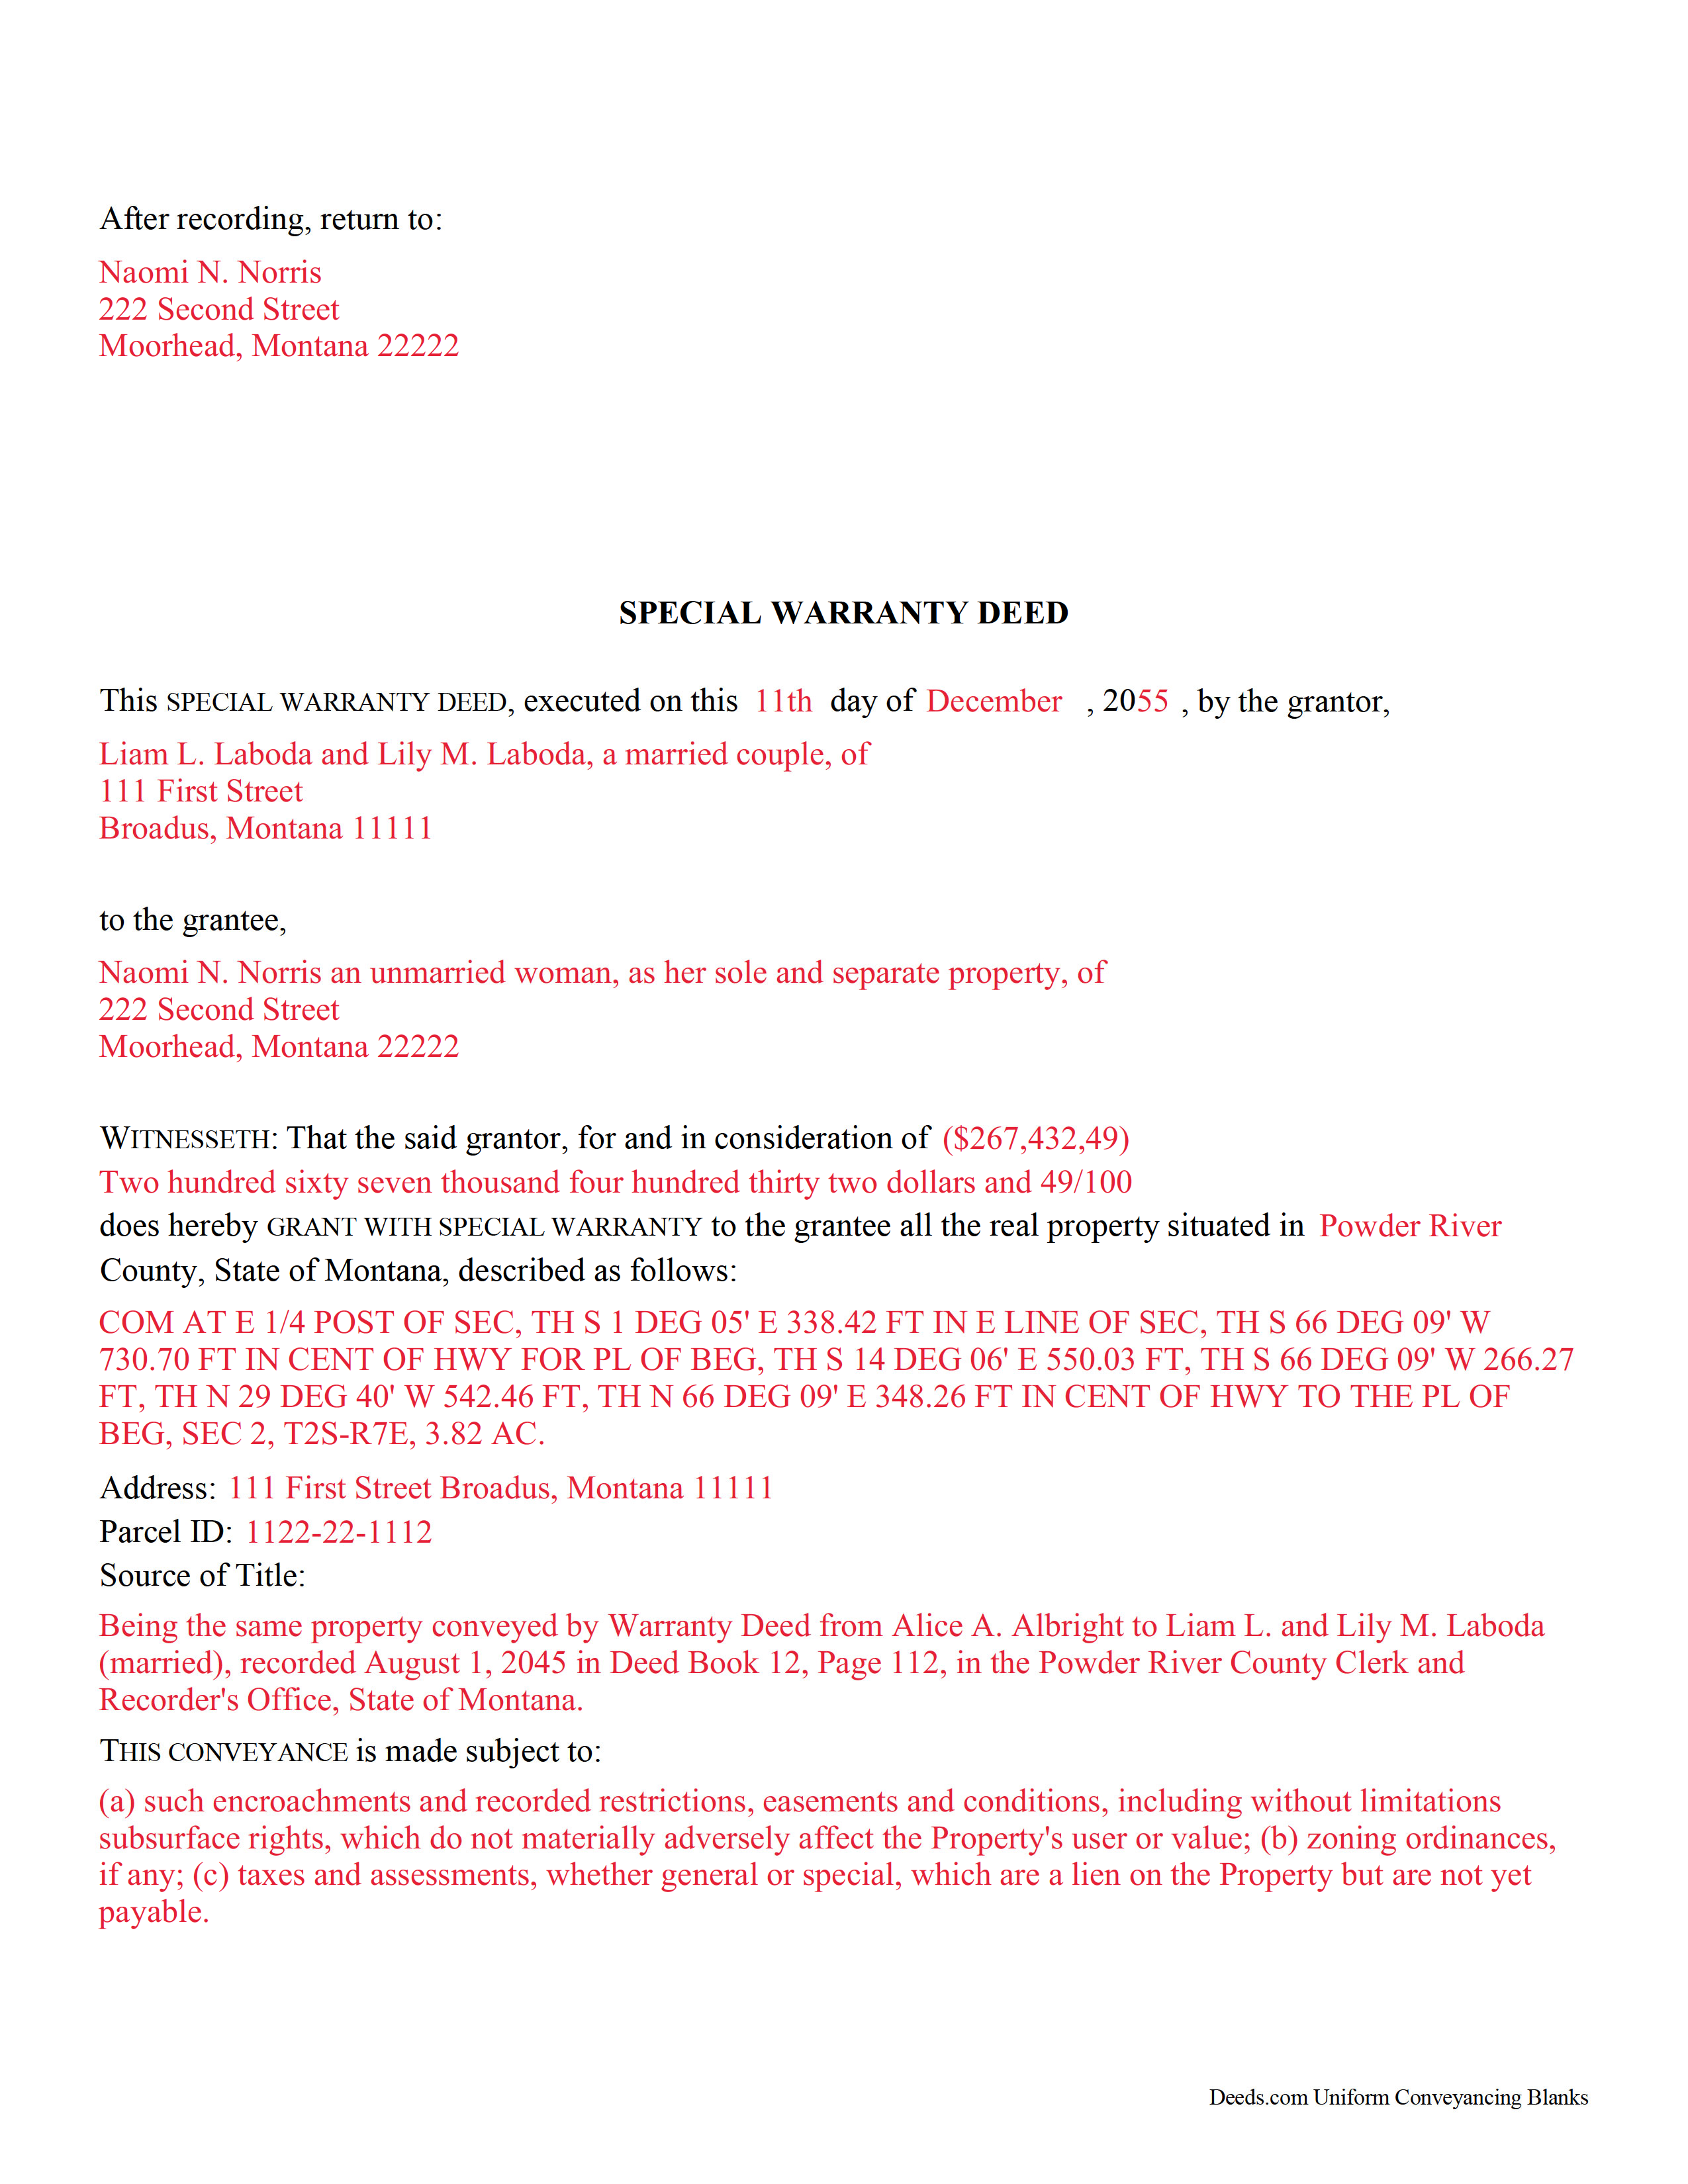 Completed Example of the Special Warranty Deed Document